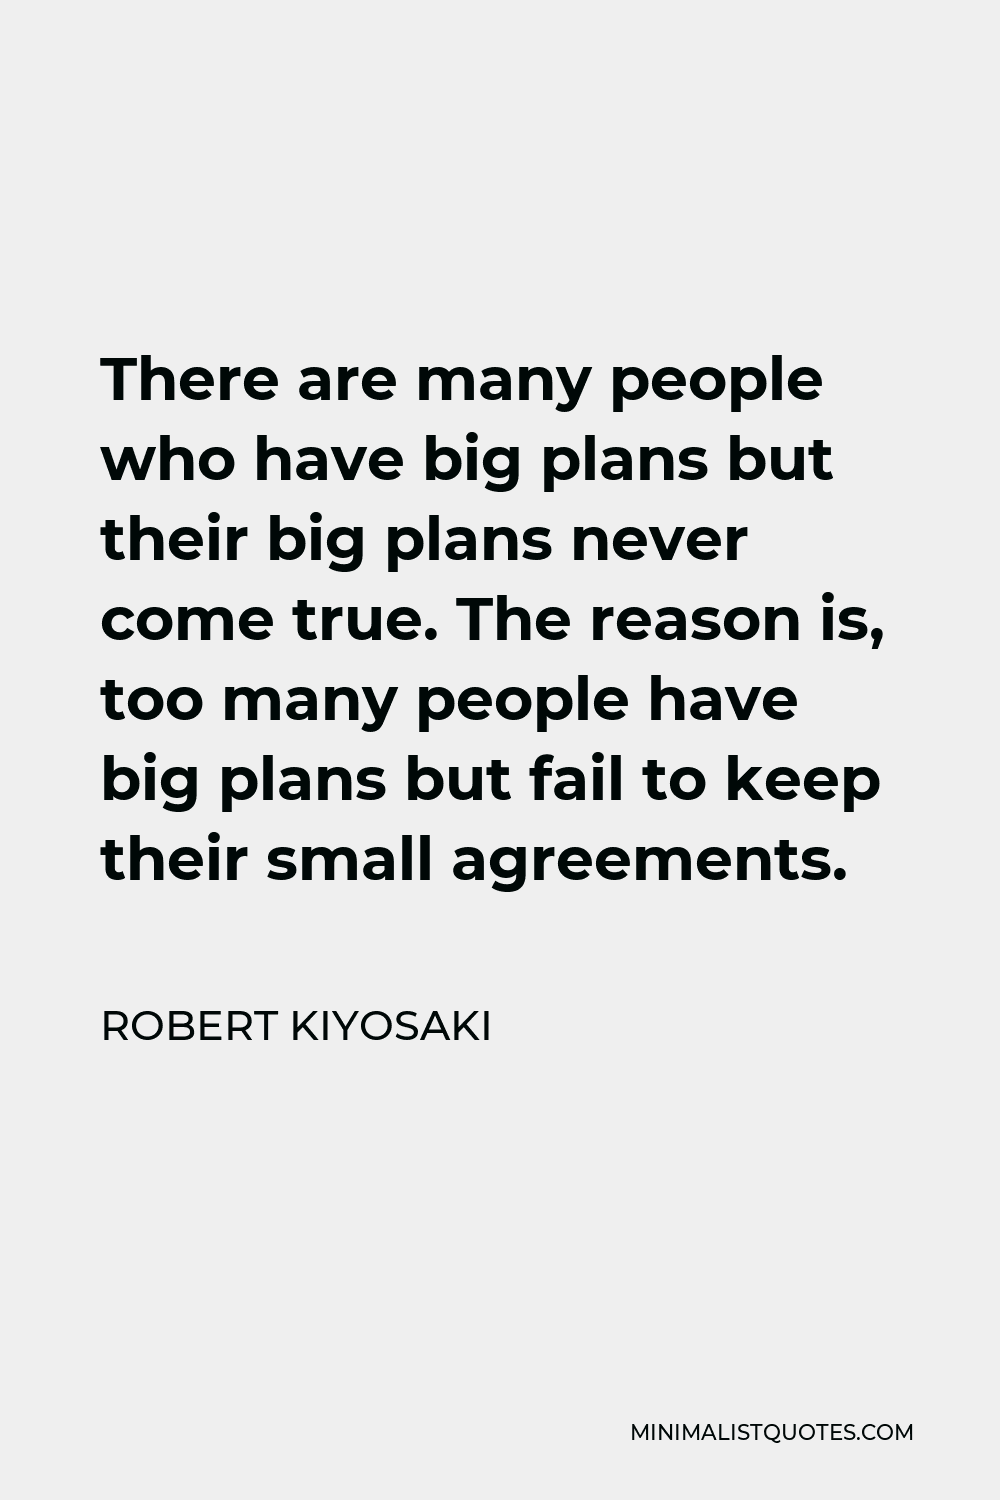 Robert Kiyosaki Quote - There are many people who have big plans but their big plans never come true. The reason is, too many people have big plans but fail to keep their small agreements.